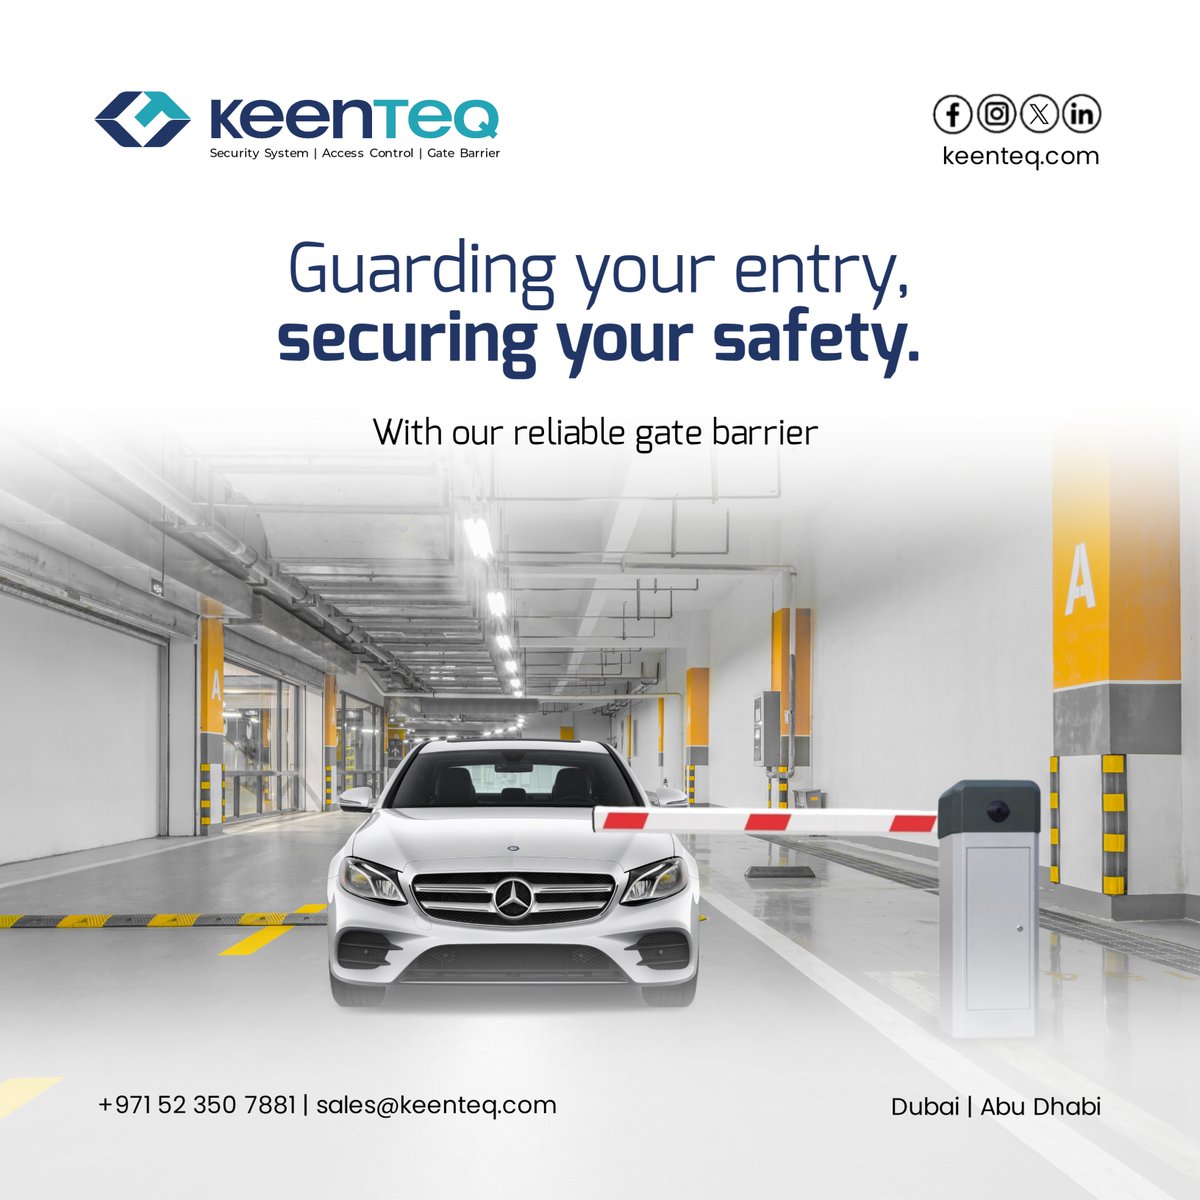 Keep your parking area secure with our Gate Barrier systems!  Whether it's a bustling mall or a corporate building, our barriers ensure smooth traffic flow while keeping unauthorized vehicles at bay.

#gatebarrier #gatebarrierdubai #security #securitysolutions #keenteq